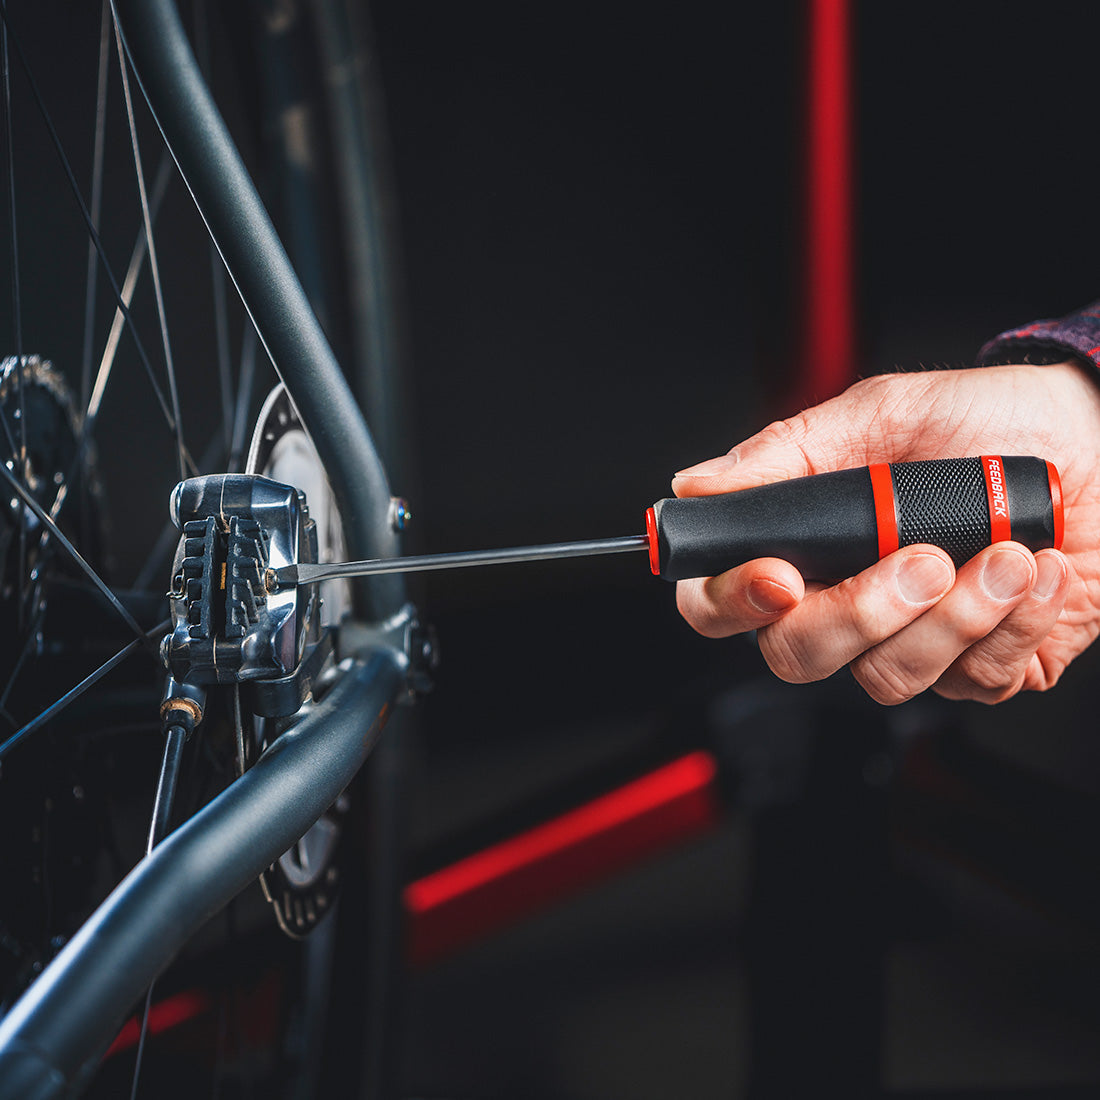 Person using screwdriver on bike in close up with dark background.